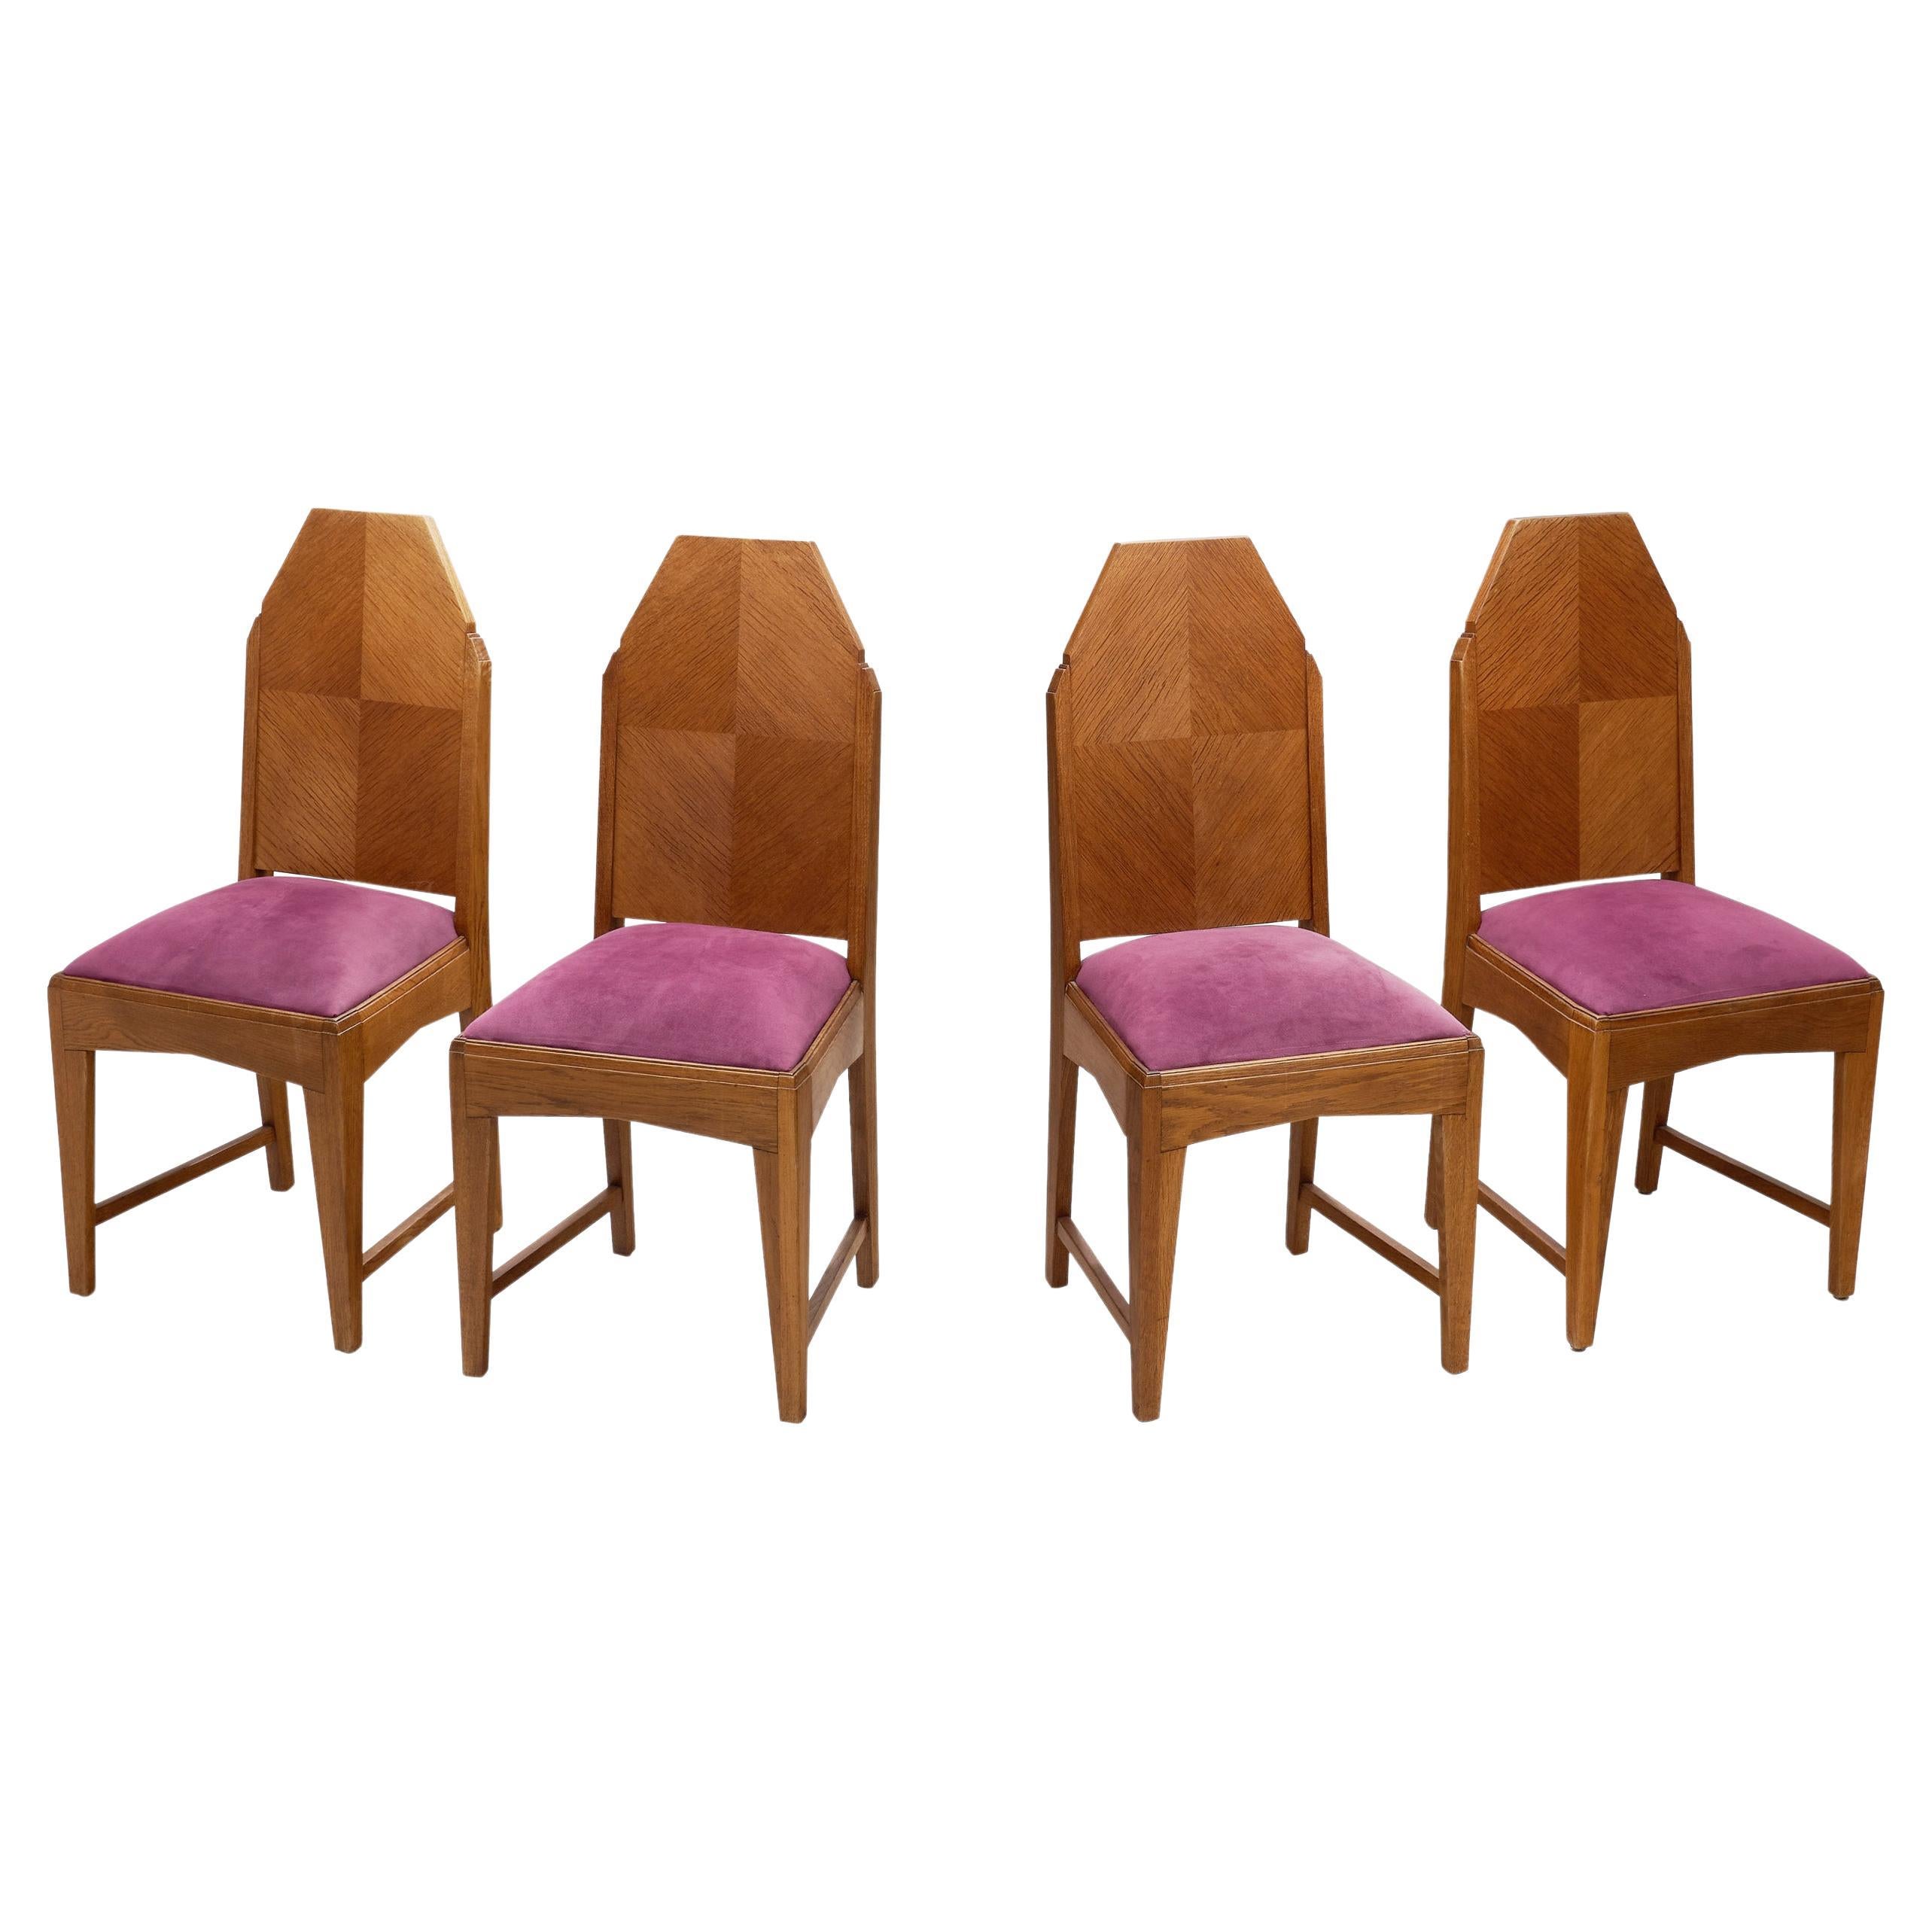 Set of Four Amsterdamse School Oak Dining Chairs, The Netherlands 1920s